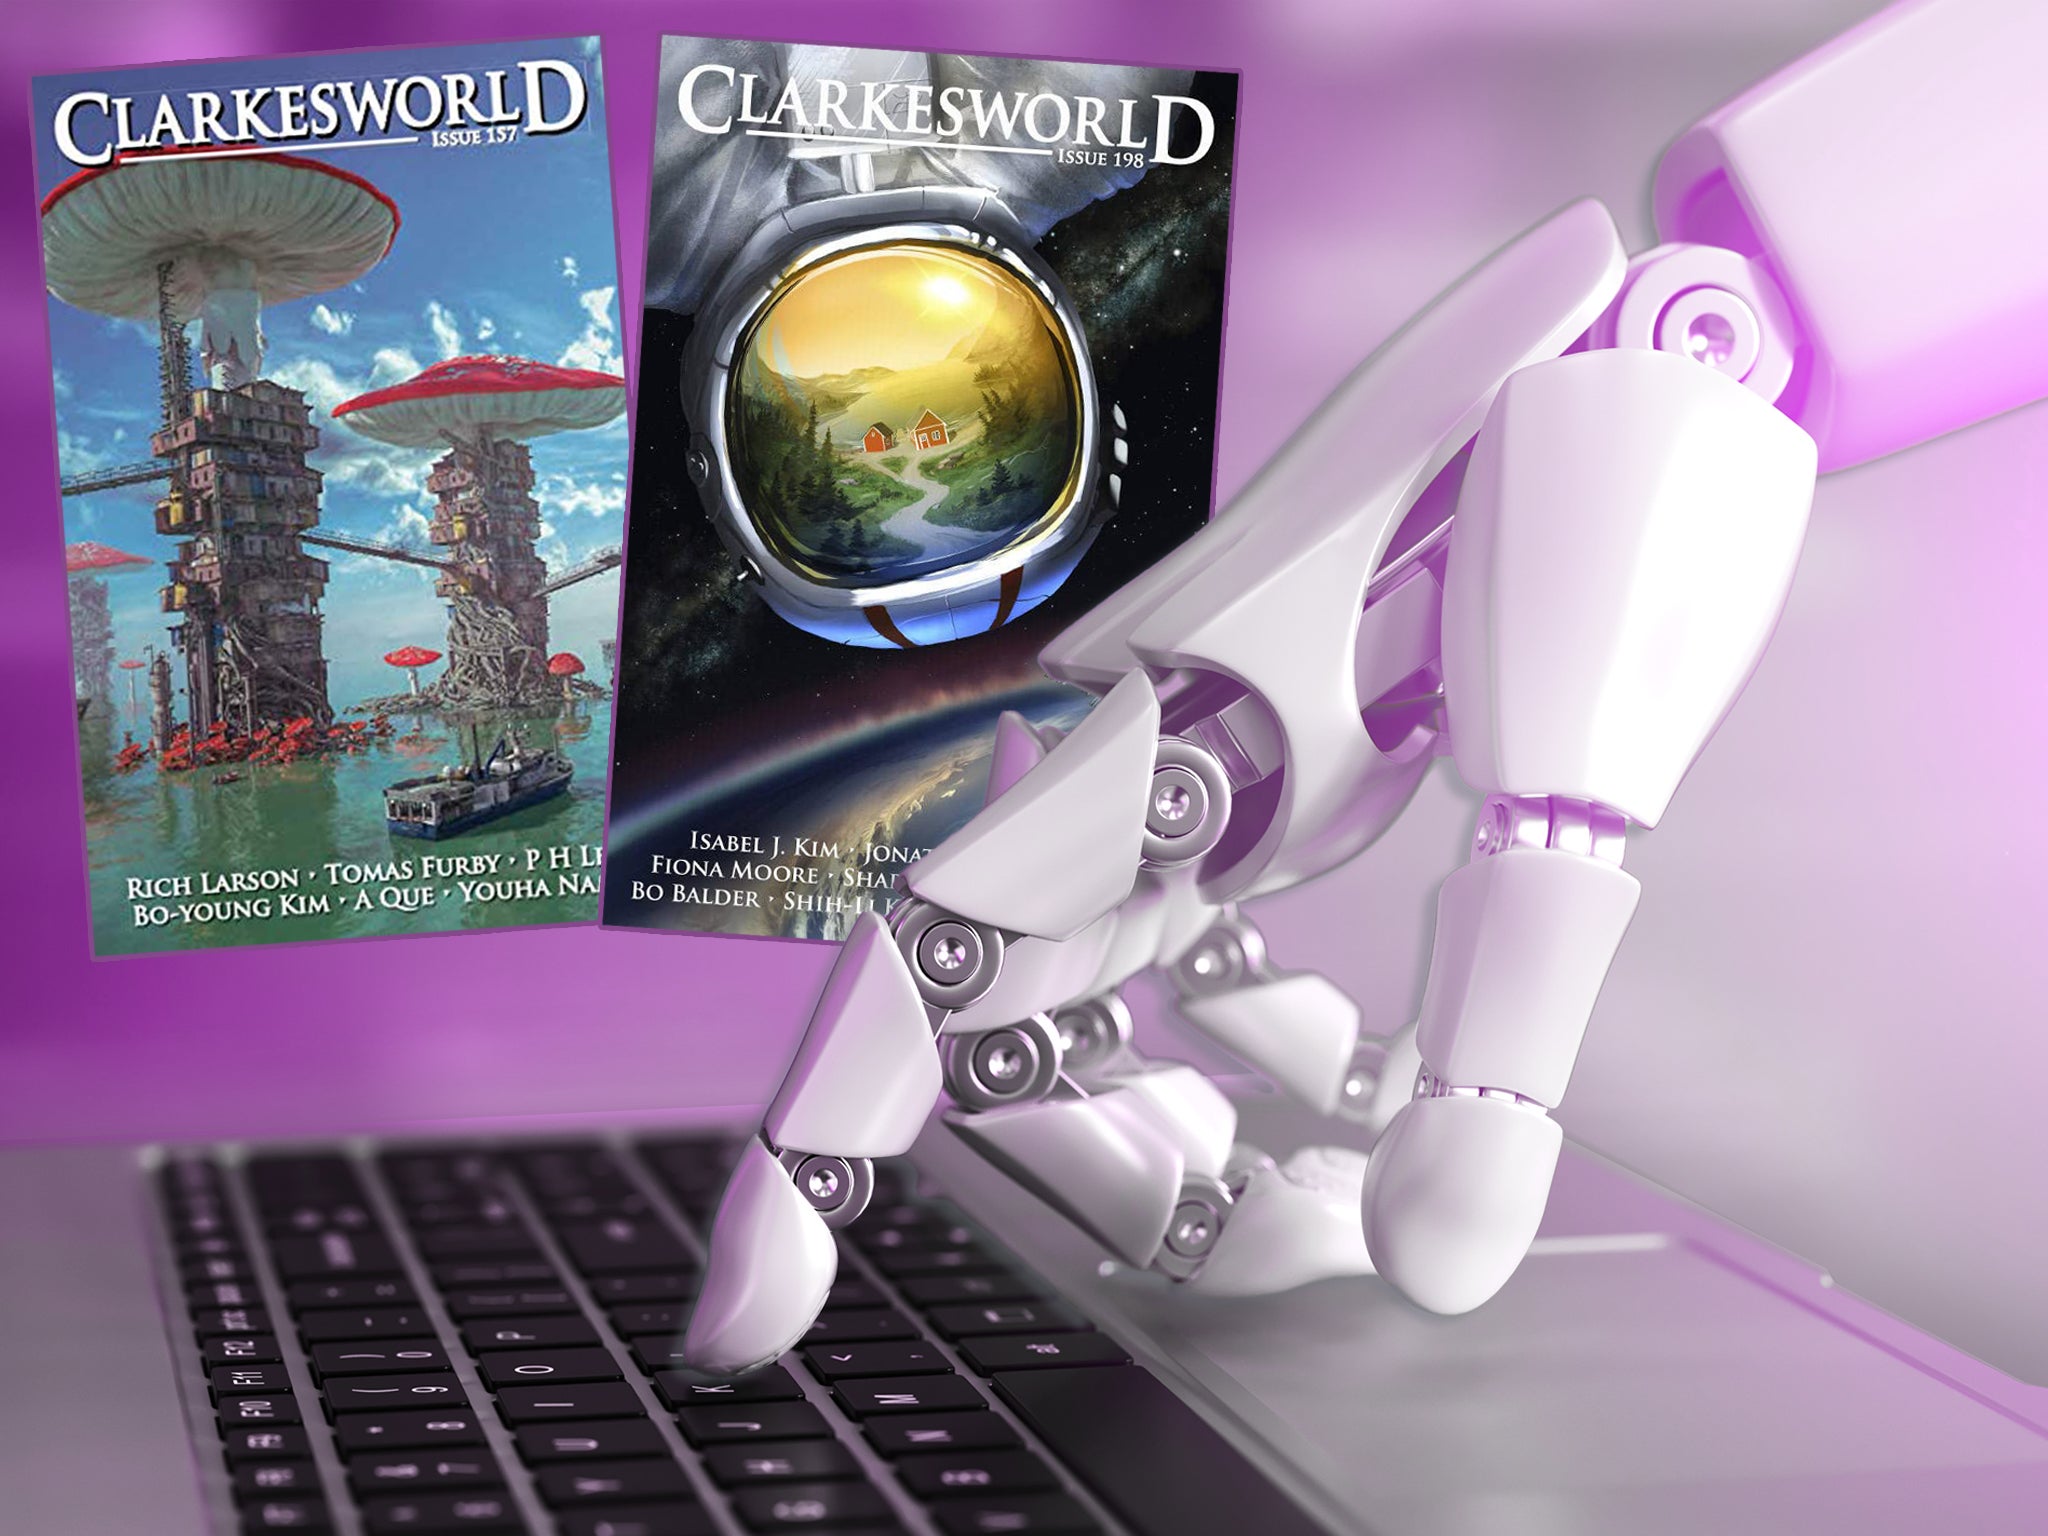 ‘Clarkesworld’ magazine recently stopped taking pitches after it was flooded with submissions created using ChatGPT and similar software